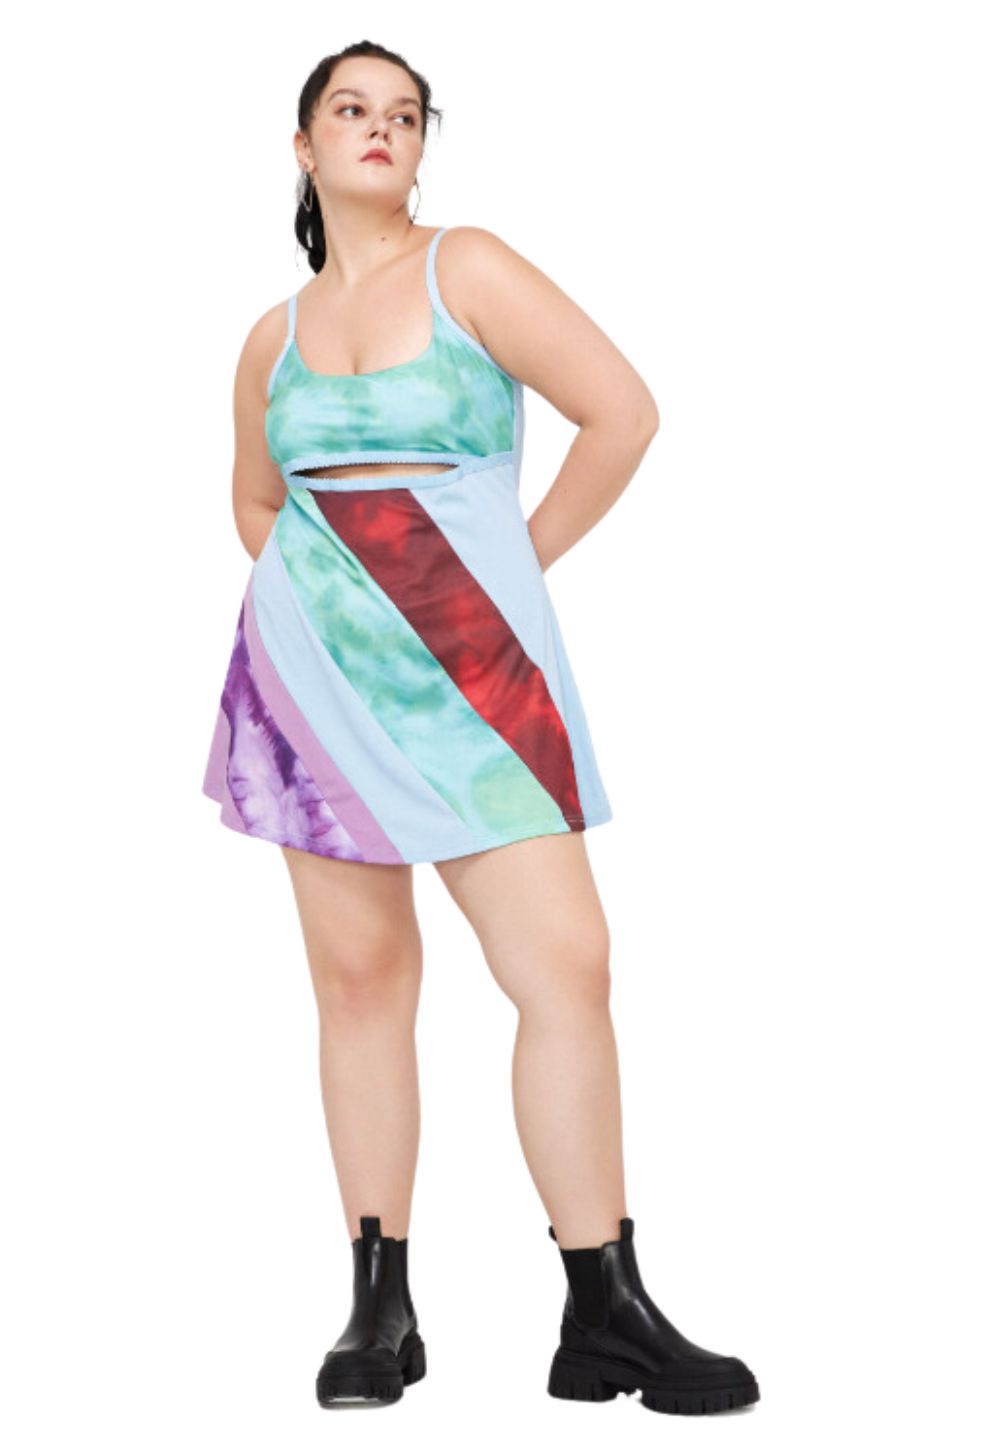 Cider 13 going on 30 Multicolor Cut-out Dress, Size 4XL